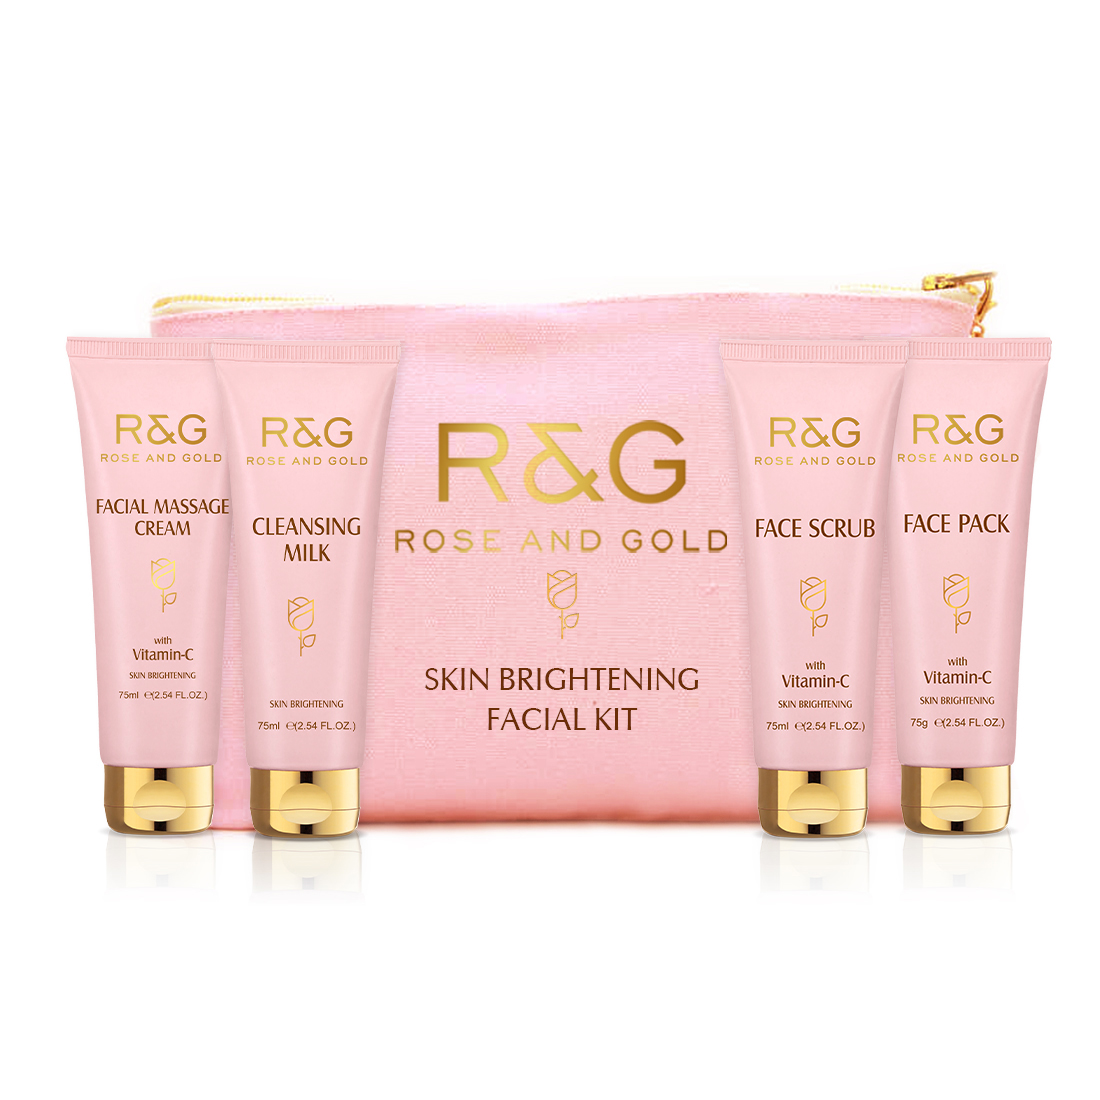 Skin Brightening Facial Kit For Gold Like Glow - Cleansing Milk, Face Scrub, Facial Massaging Cream, Face Pack - 4 Easy Steps For Bright and Radiant Skin - Usage Upto 7 Times For Facial